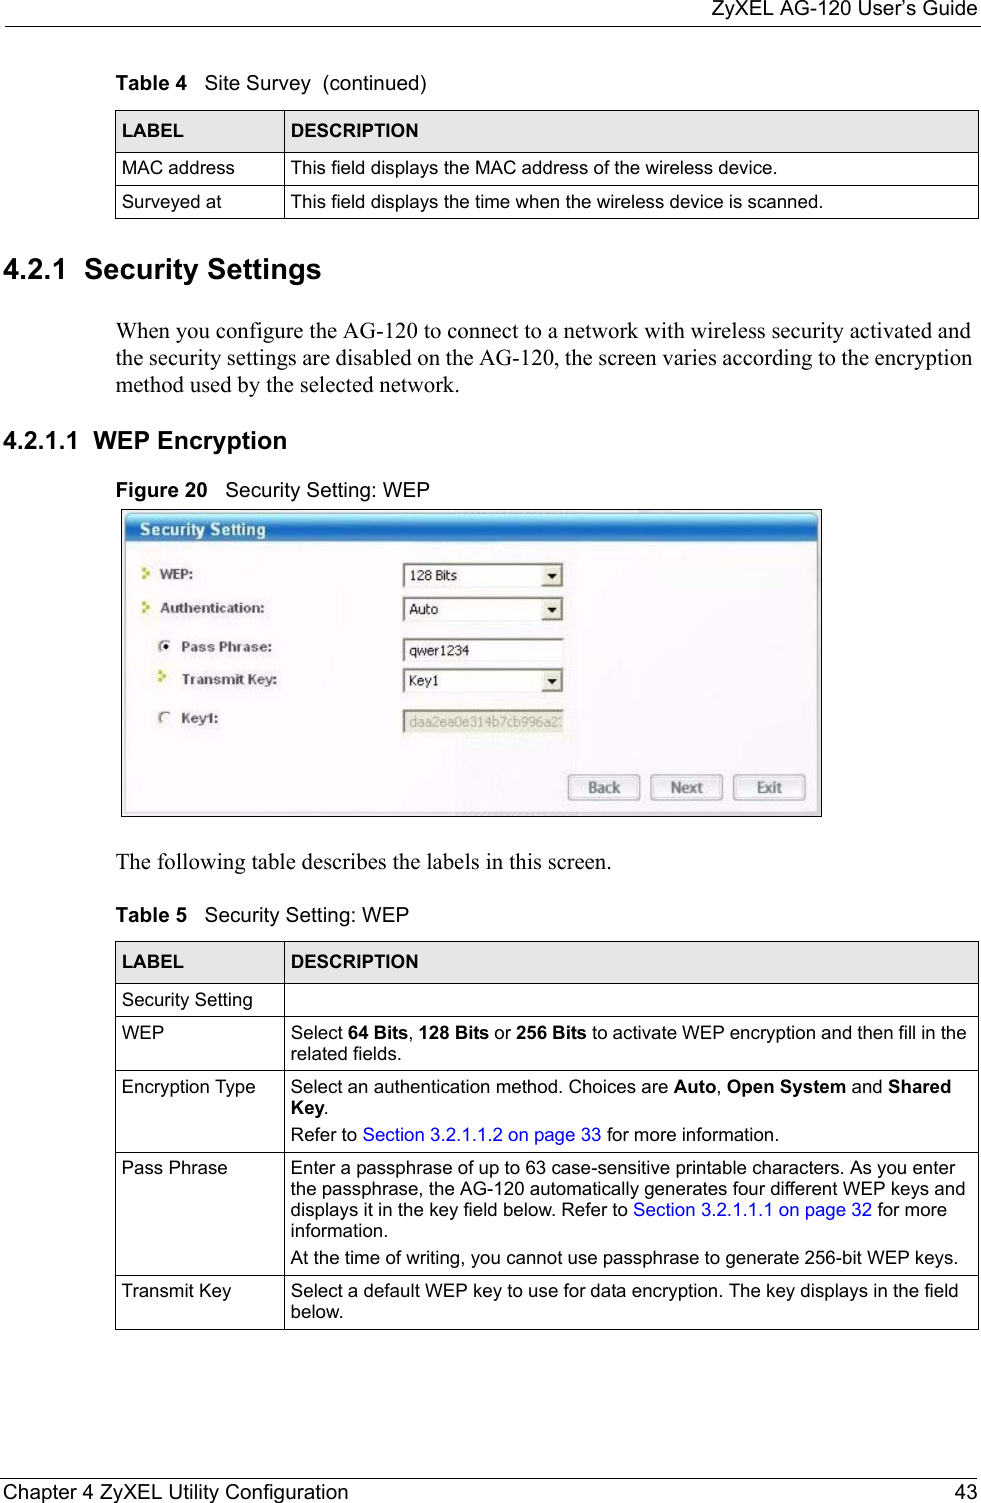 ZyXEL AG-120 User’s GuideChapter 4 ZyXEL Utility Configuration 434.2.1  Security Settings When you configure the AG-120 to connect to a network with wireless security activated and the security settings are disabled on the AG-120, the screen varies according to the encryption method used by the selected network.4.2.1.1  WEP EncryptionFigure 20   Security Setting: WEP  The following table describes the labels in this screen.  MAC address  This field displays the MAC address of the wireless device.Surveyed at  This field displays the time when the wireless device is scanned.Table 4   Site Survey  (continued)LABEL DESCRIPTIONTable 5   Security Setting: WEP LABEL DESCRIPTIONSecurity SettingWEP Select 64 Bits, 128 Bits or 256 Bits to activate WEP encryption and then fill in the related fields.Encryption Type Select an authentication method. Choices are Auto, Open System and Shared Key.Refer to Section 3.2.1.1.2 on page 33 for more information.Pass Phrase Enter a passphrase of up to 63 case-sensitive printable characters. As you enter the passphrase, the AG-120 automatically generates four different WEP keys and displays it in the key field below. Refer to Section 3.2.1.1.1 on page 32 for more information.At the time of writing, you cannot use passphrase to generate 256-bit WEP keys.Transmit Key Select a default WEP key to use for data encryption. The key displays in the field below.